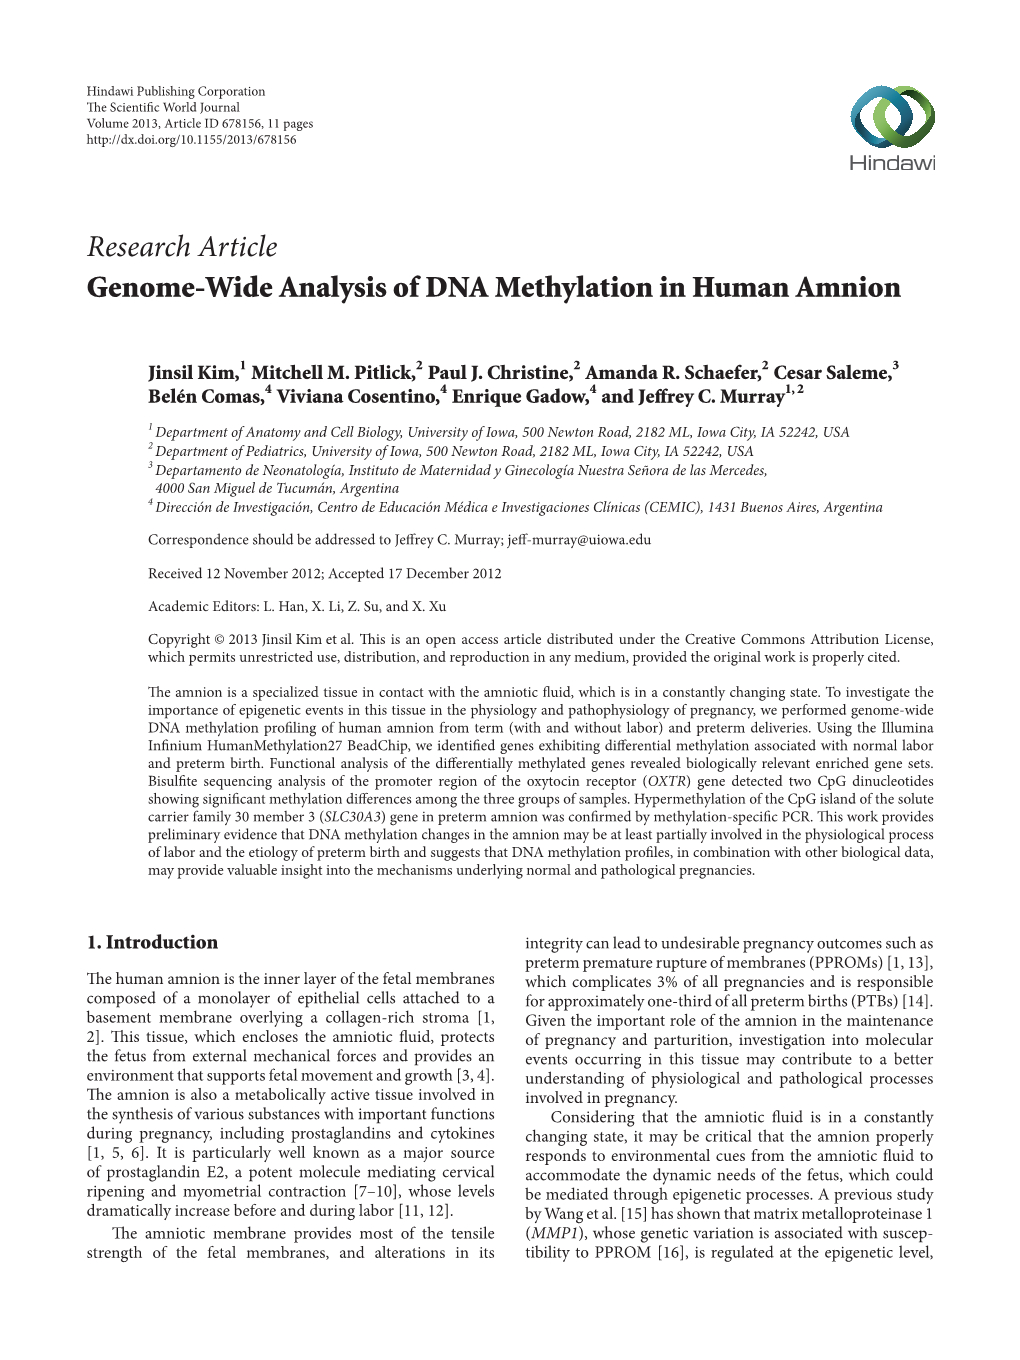 Genome-Wide Analysis of DNA Methylation in Human Amnion